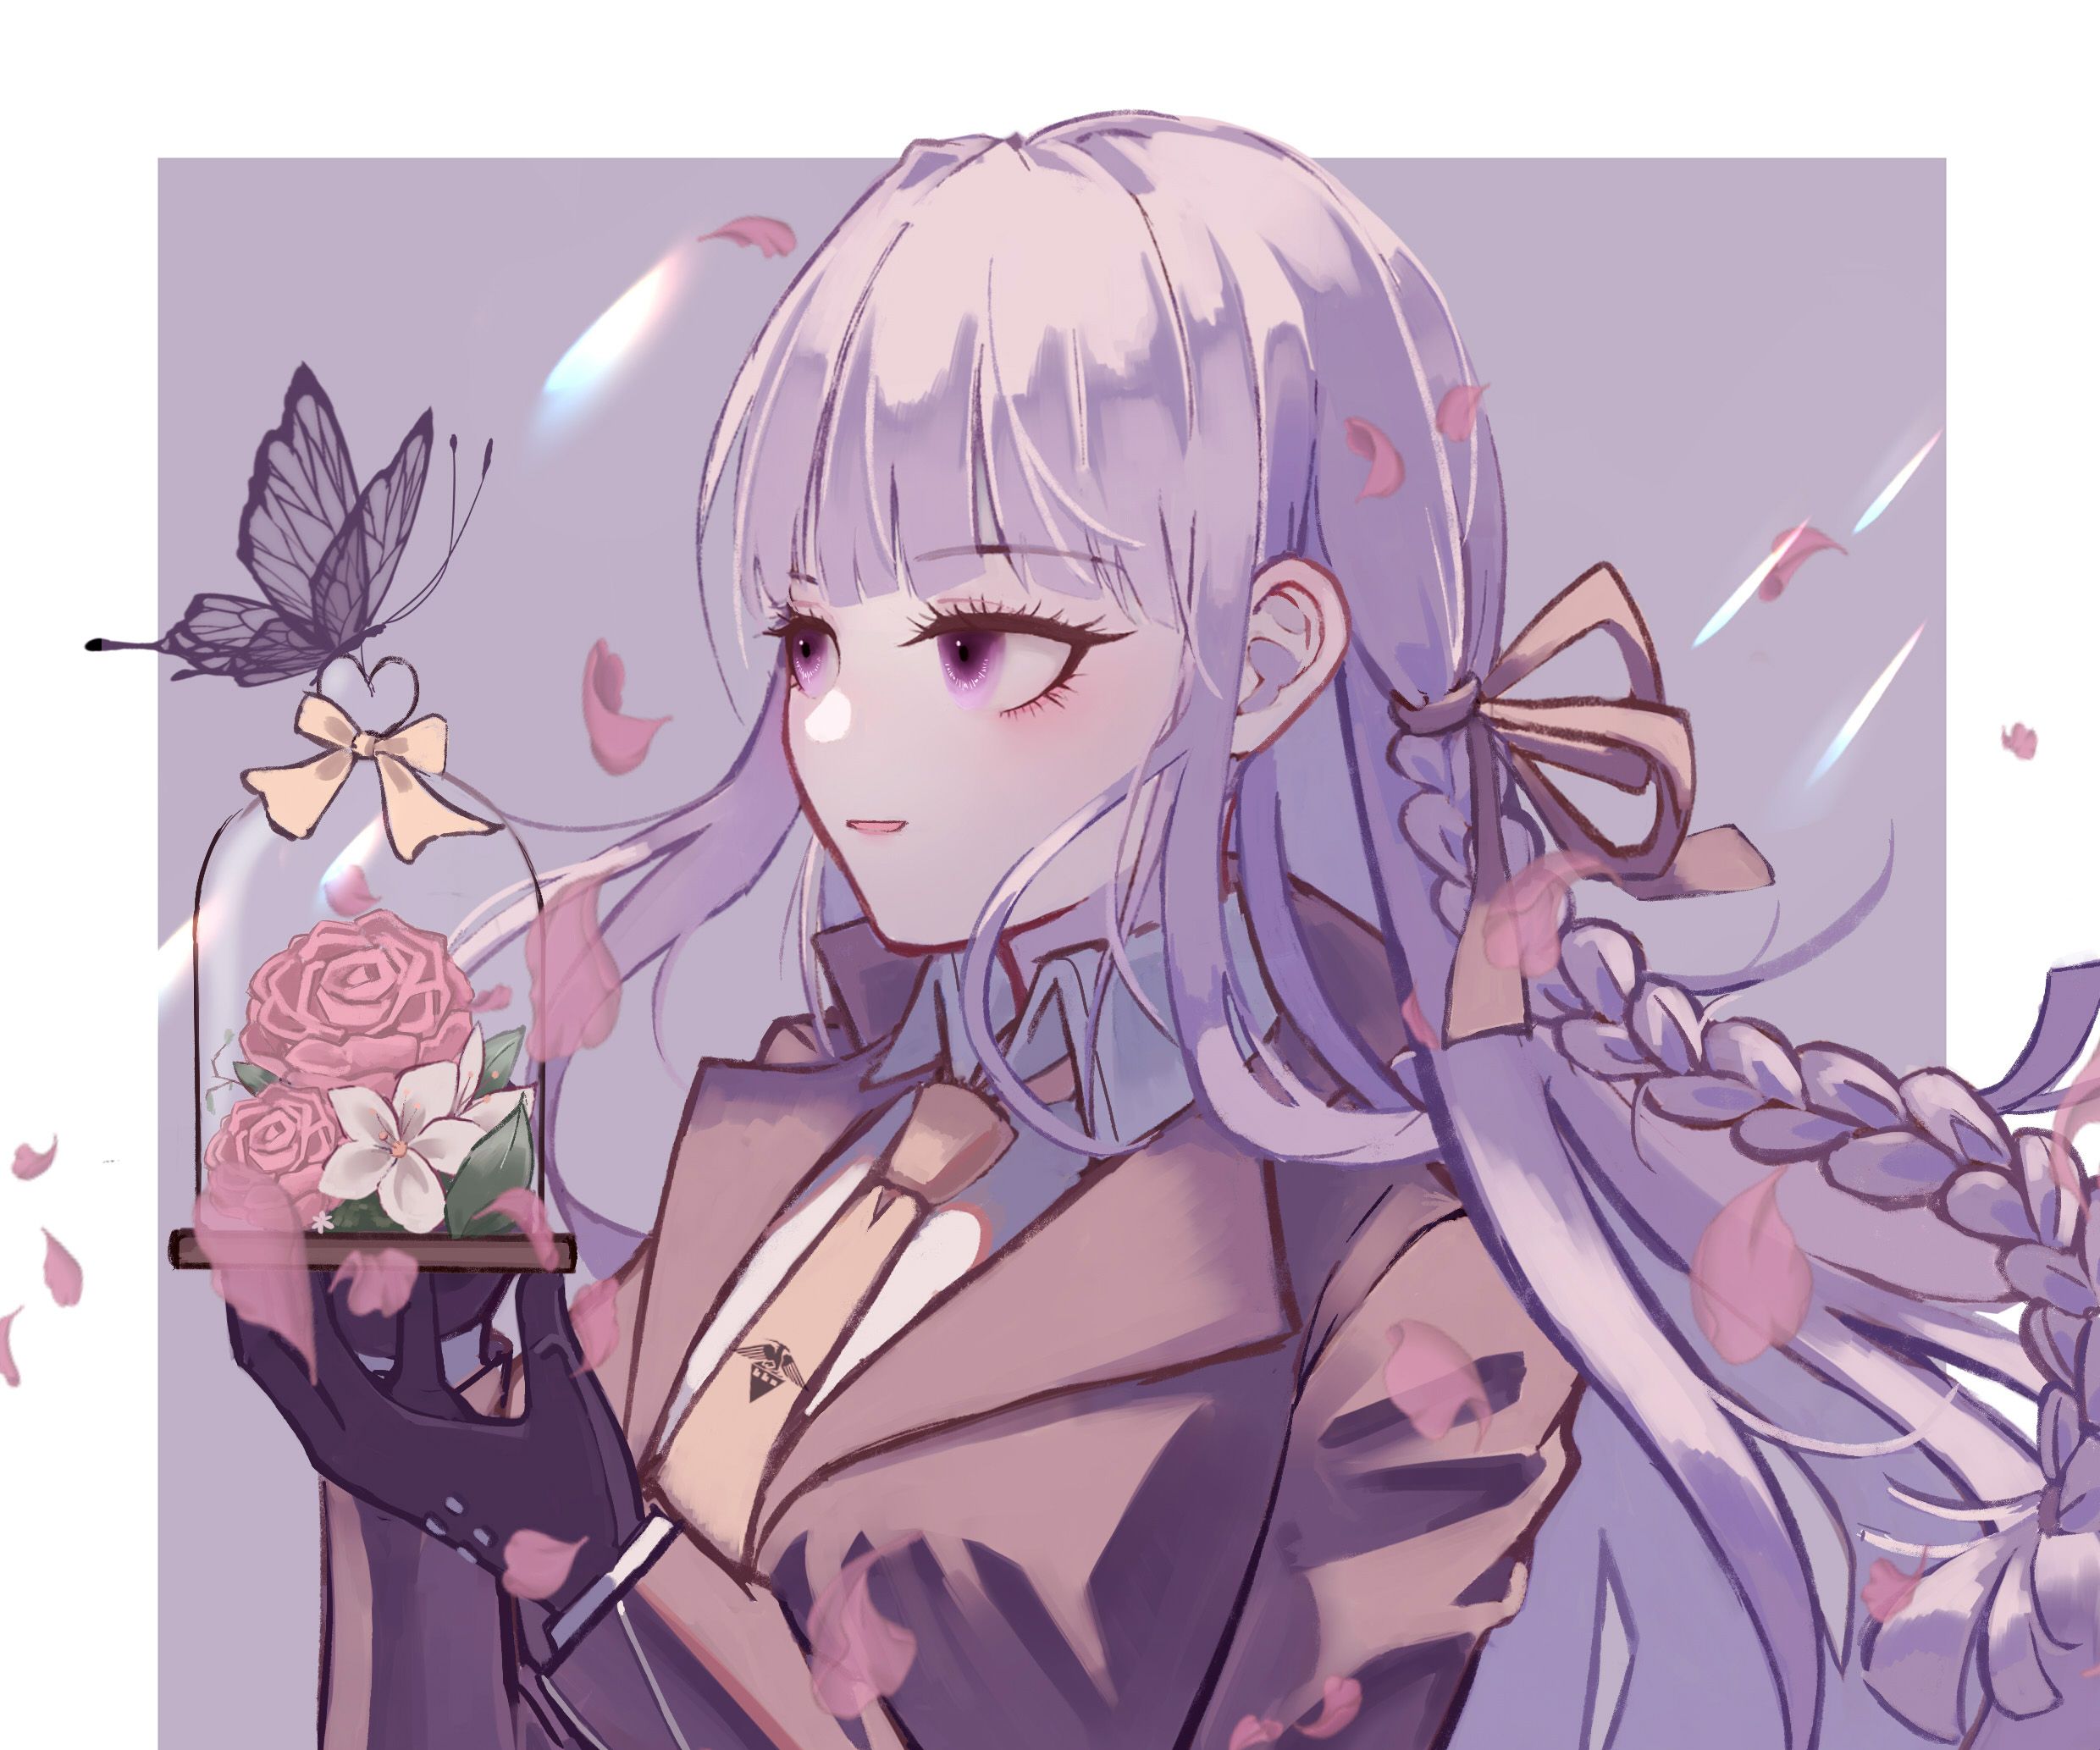 A girl with long hair holding flowers in her hand - Danganronpa